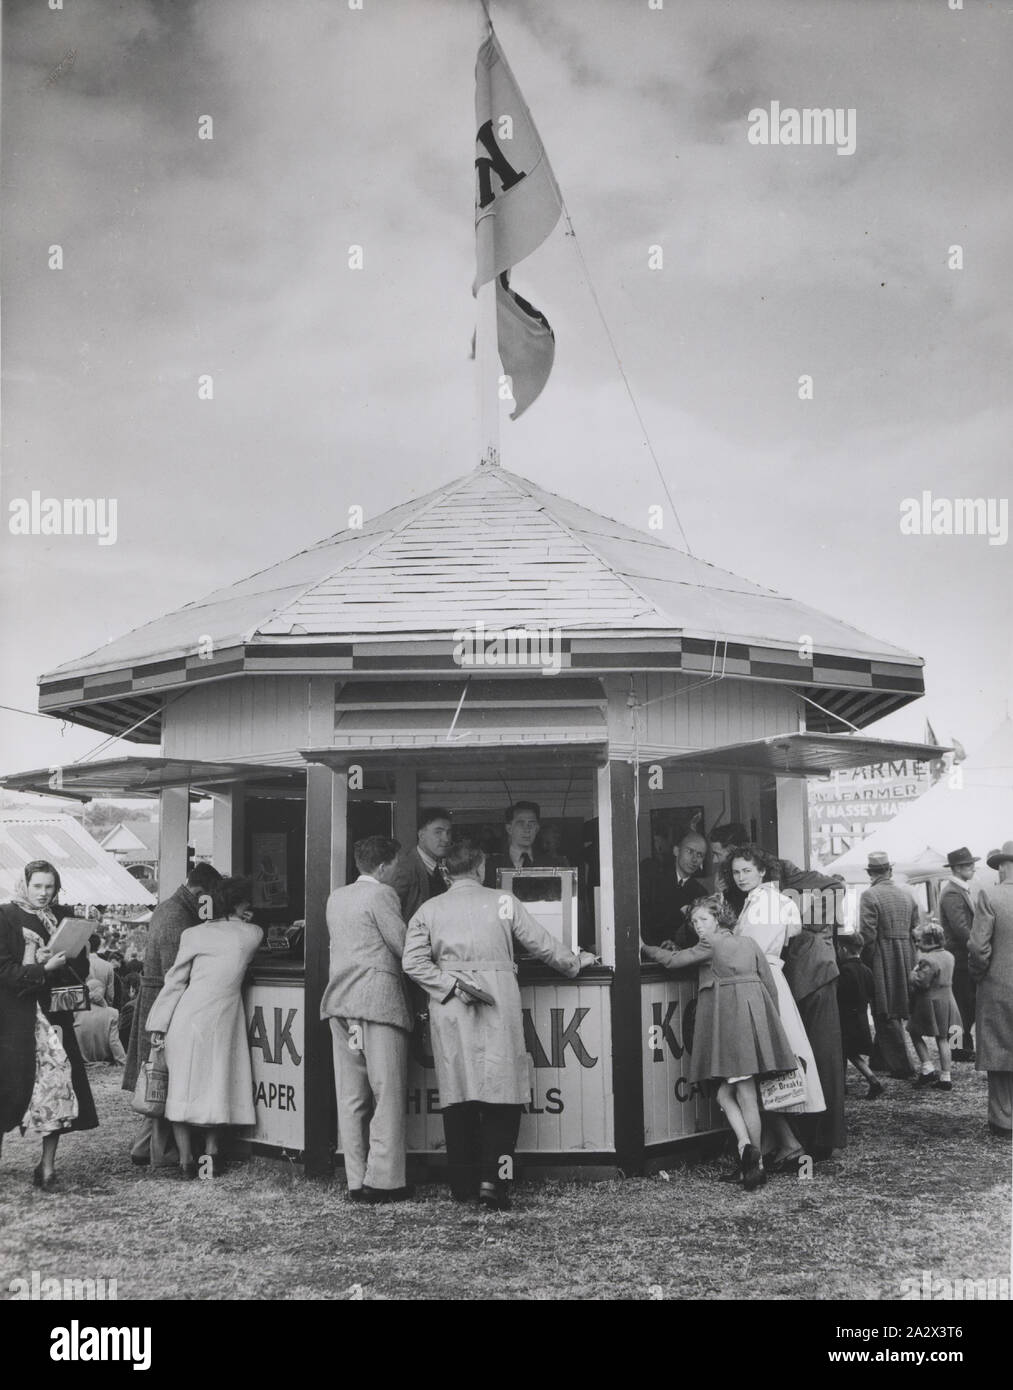 Photograph, Customers at Booth in Exhibition Grounds, circa 1930s, Black and white photograph of a Kodak Australasia Pty Ltd booth in an open-air exhibition ground, possibly the Royal Melbourne Show, or another interstate Royal Exhibition, circa 1930s. Six customers are lining up around the display and several male Kodak staff members are serving them, but many people have turned to look at the camera. This photograph is part of the Kodak collection of Stock Photo